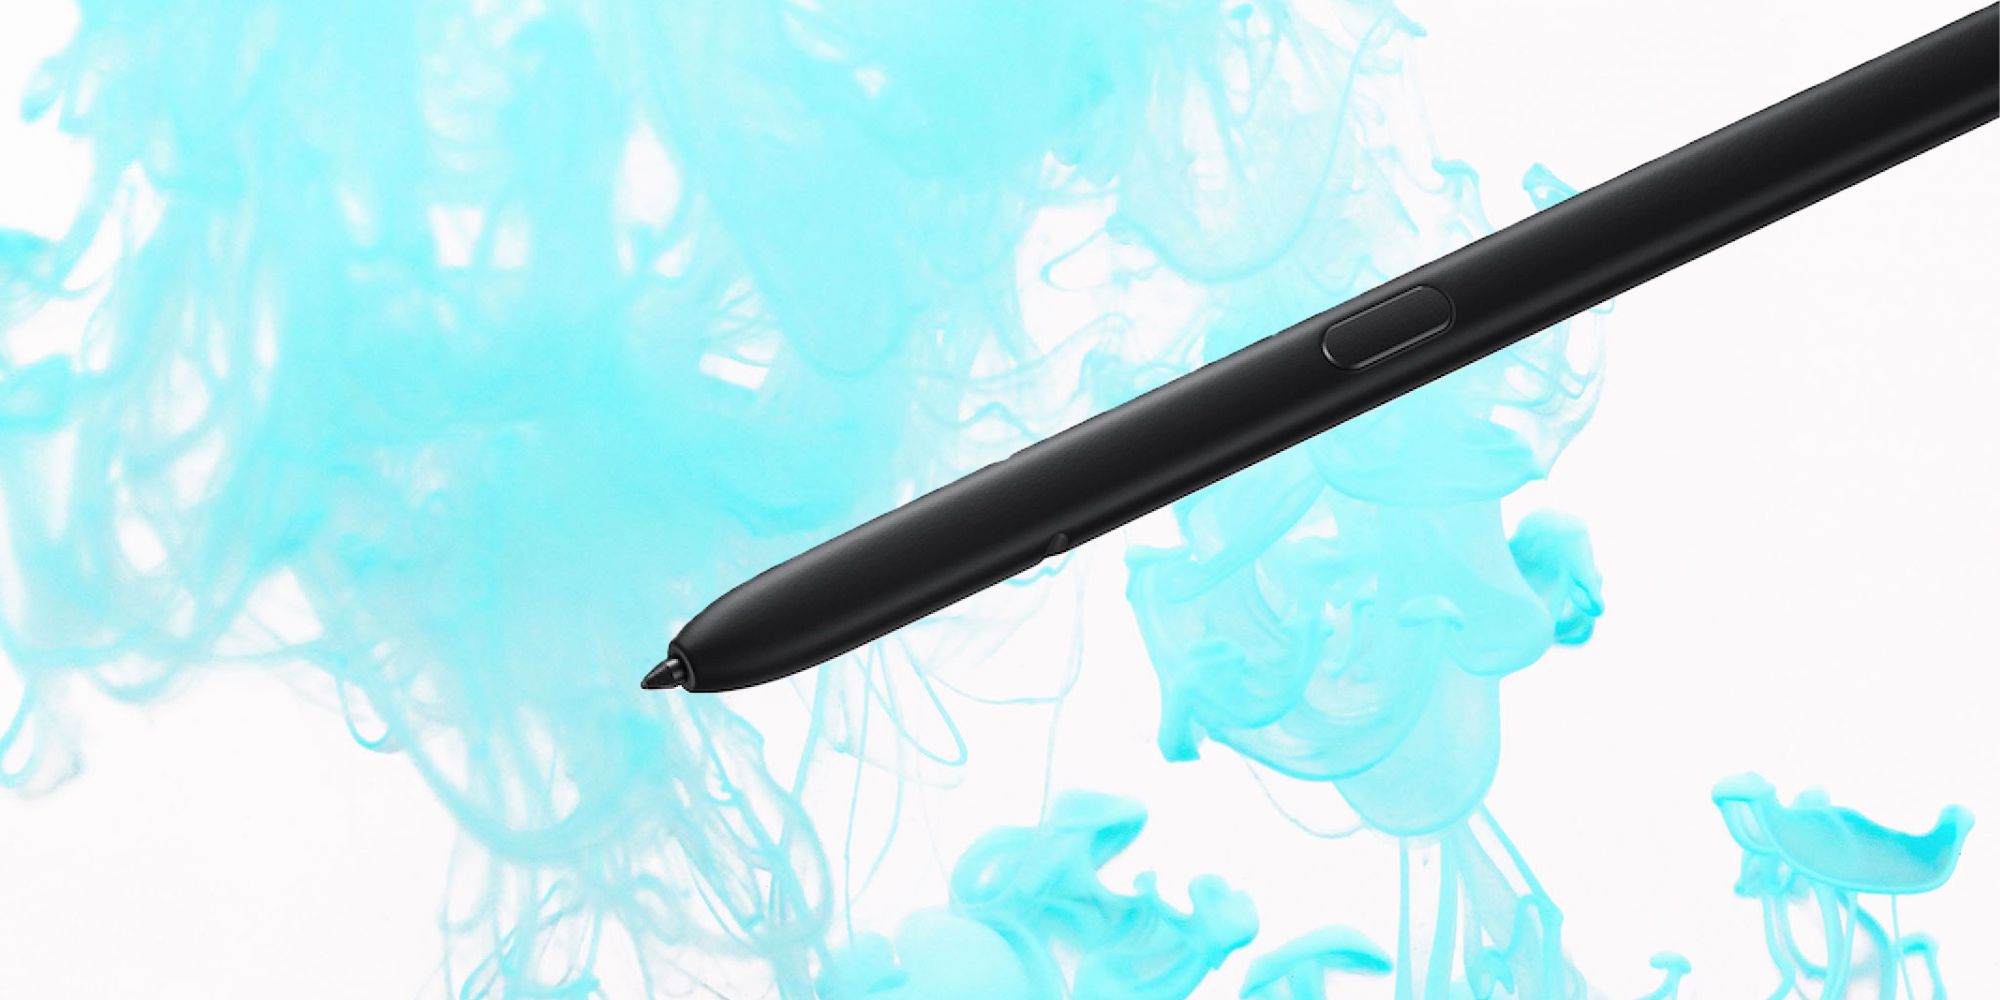 A black Samsung S Pen is pictured on a background with swirling light blue ink